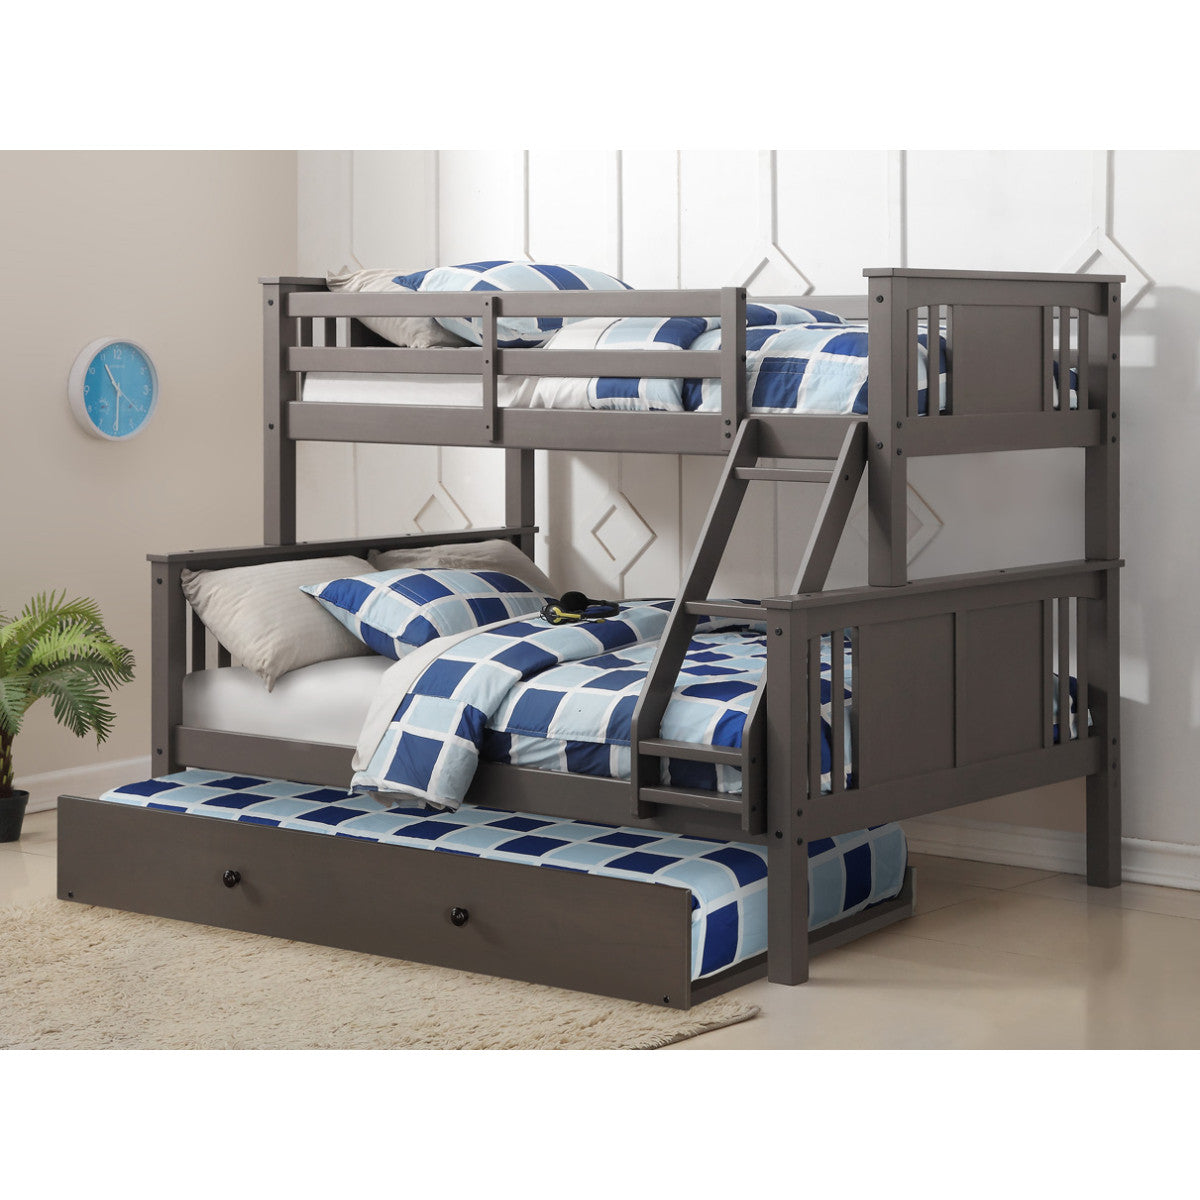 TWIN/FULL PRINCETON BUNK BED WITH TRUNDLE BED SLATE GREY